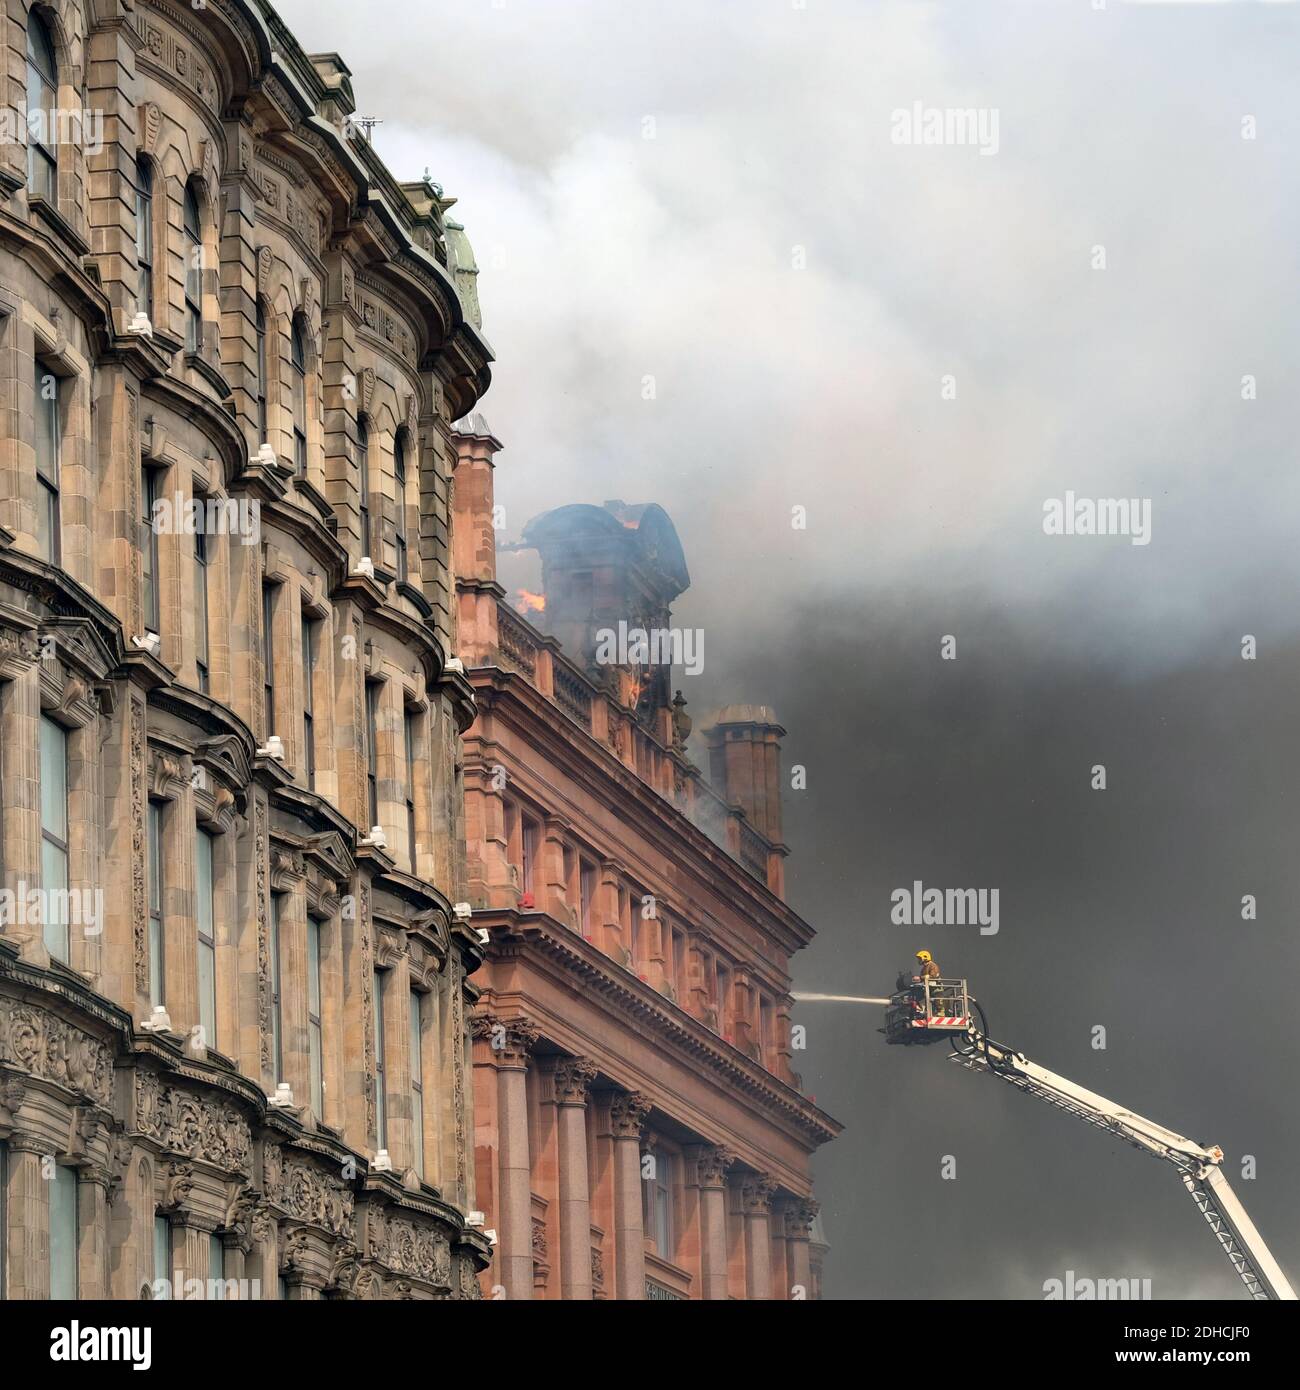 Firefighter at Primark, Bank Buildings, Central Belfast Stock Photo